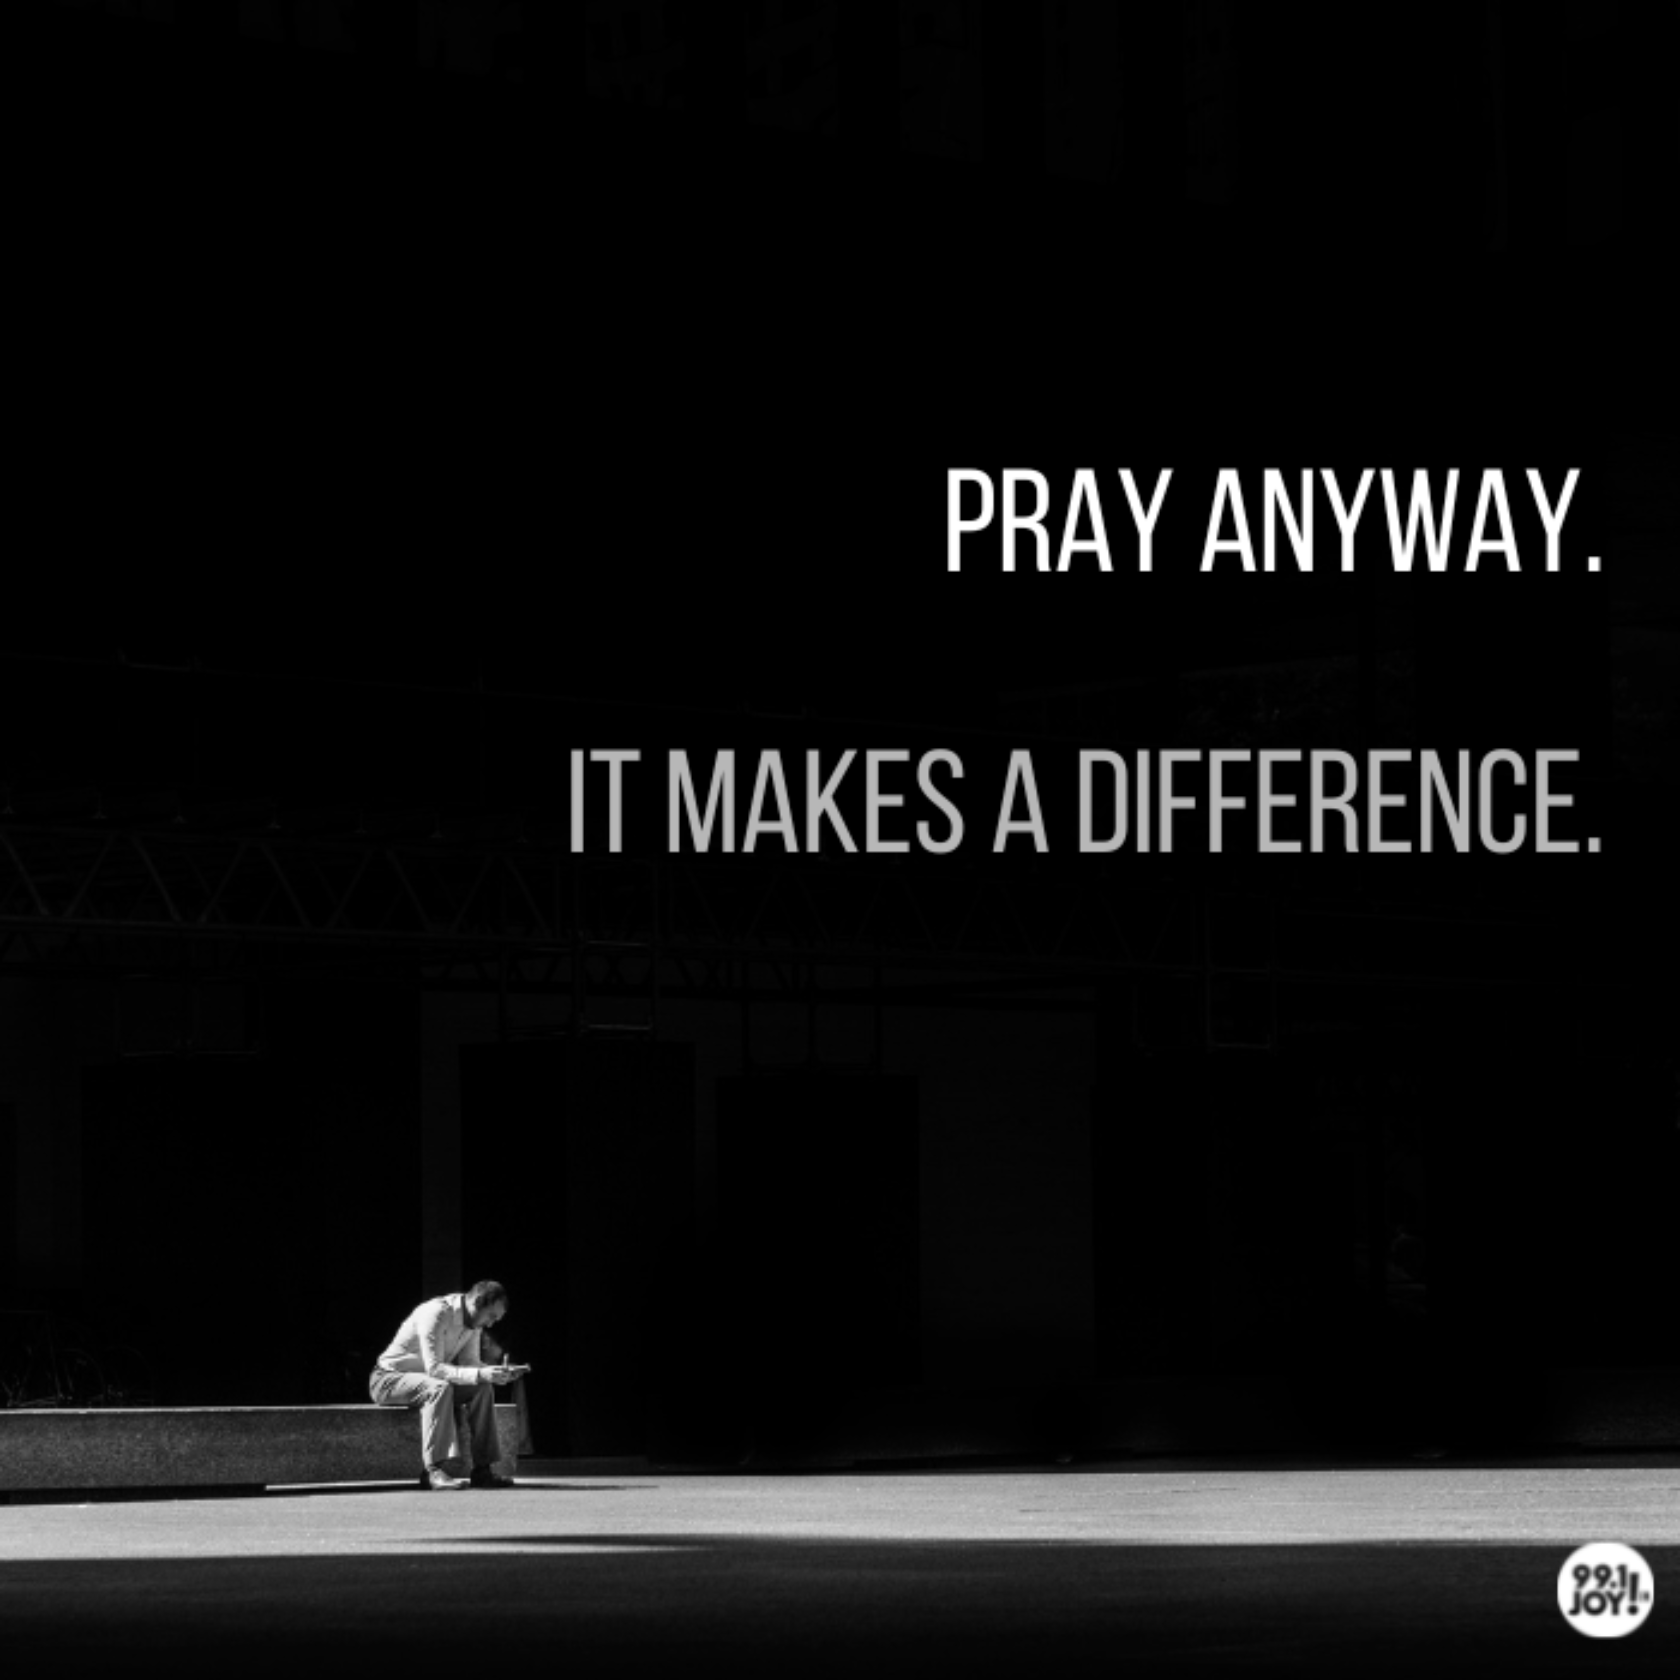 Pray Anyway. It Makes A Difference.